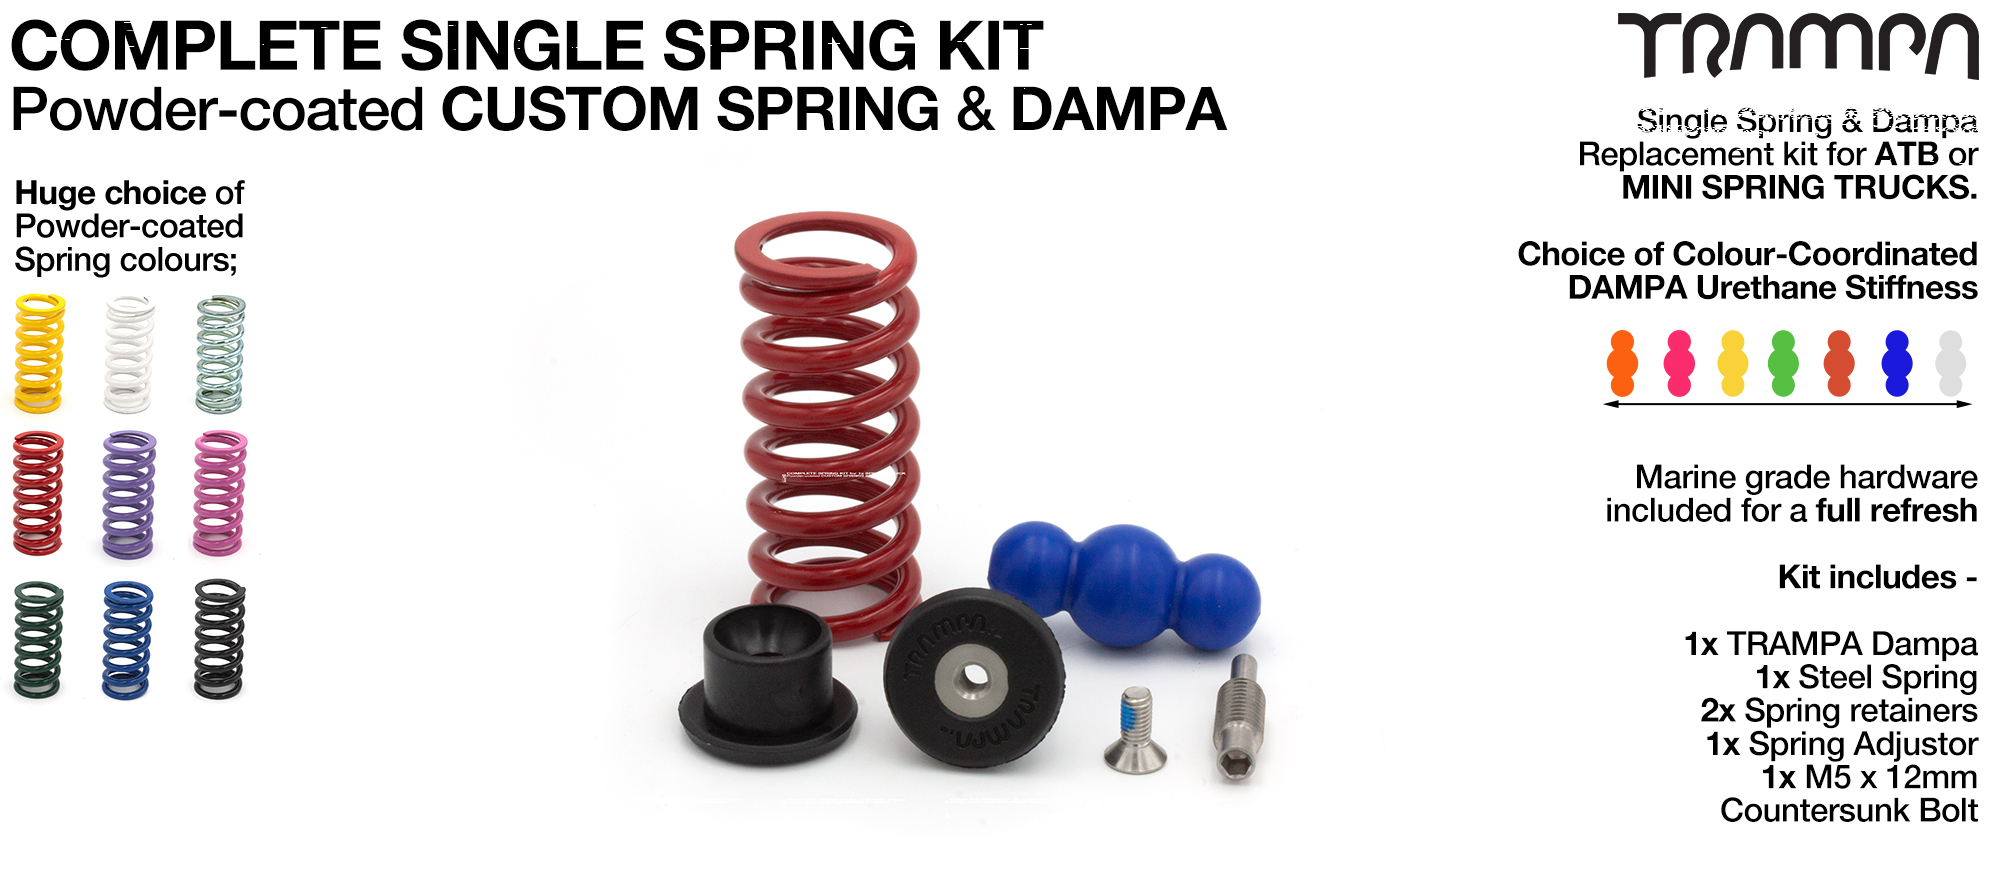 Complete Spring kit for 1x Spring = 1x Spring 1x Dampa 2x Spring Retainers 1x Spring Adjuster & 1 M5x12mm Countersunk Bolt 